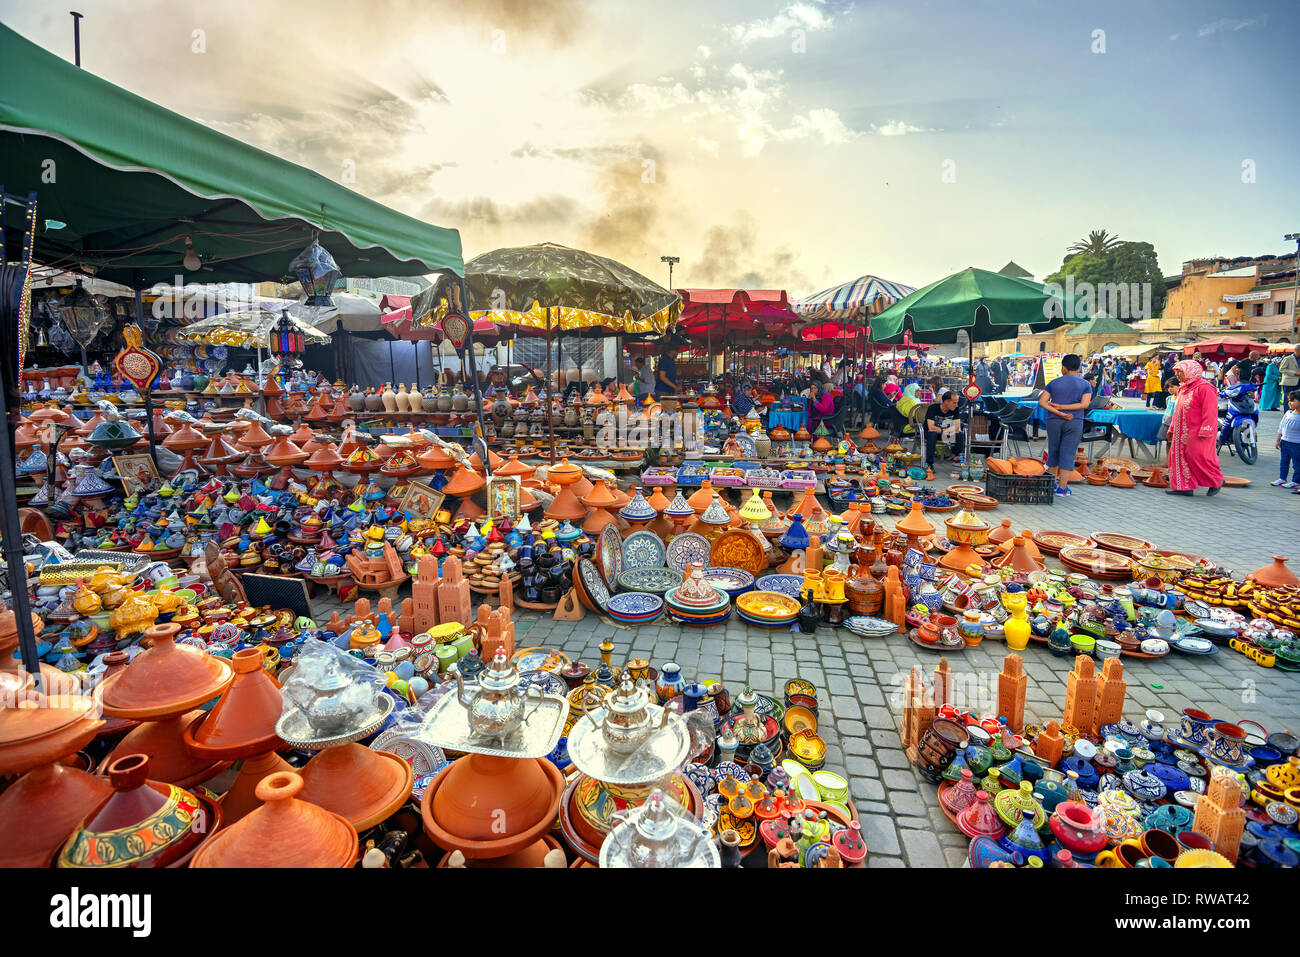 Sale of colorful pottery, traditional ceramic tagines at city market. Meknes, Maghreb, Morocco, North Africa Stock Photo